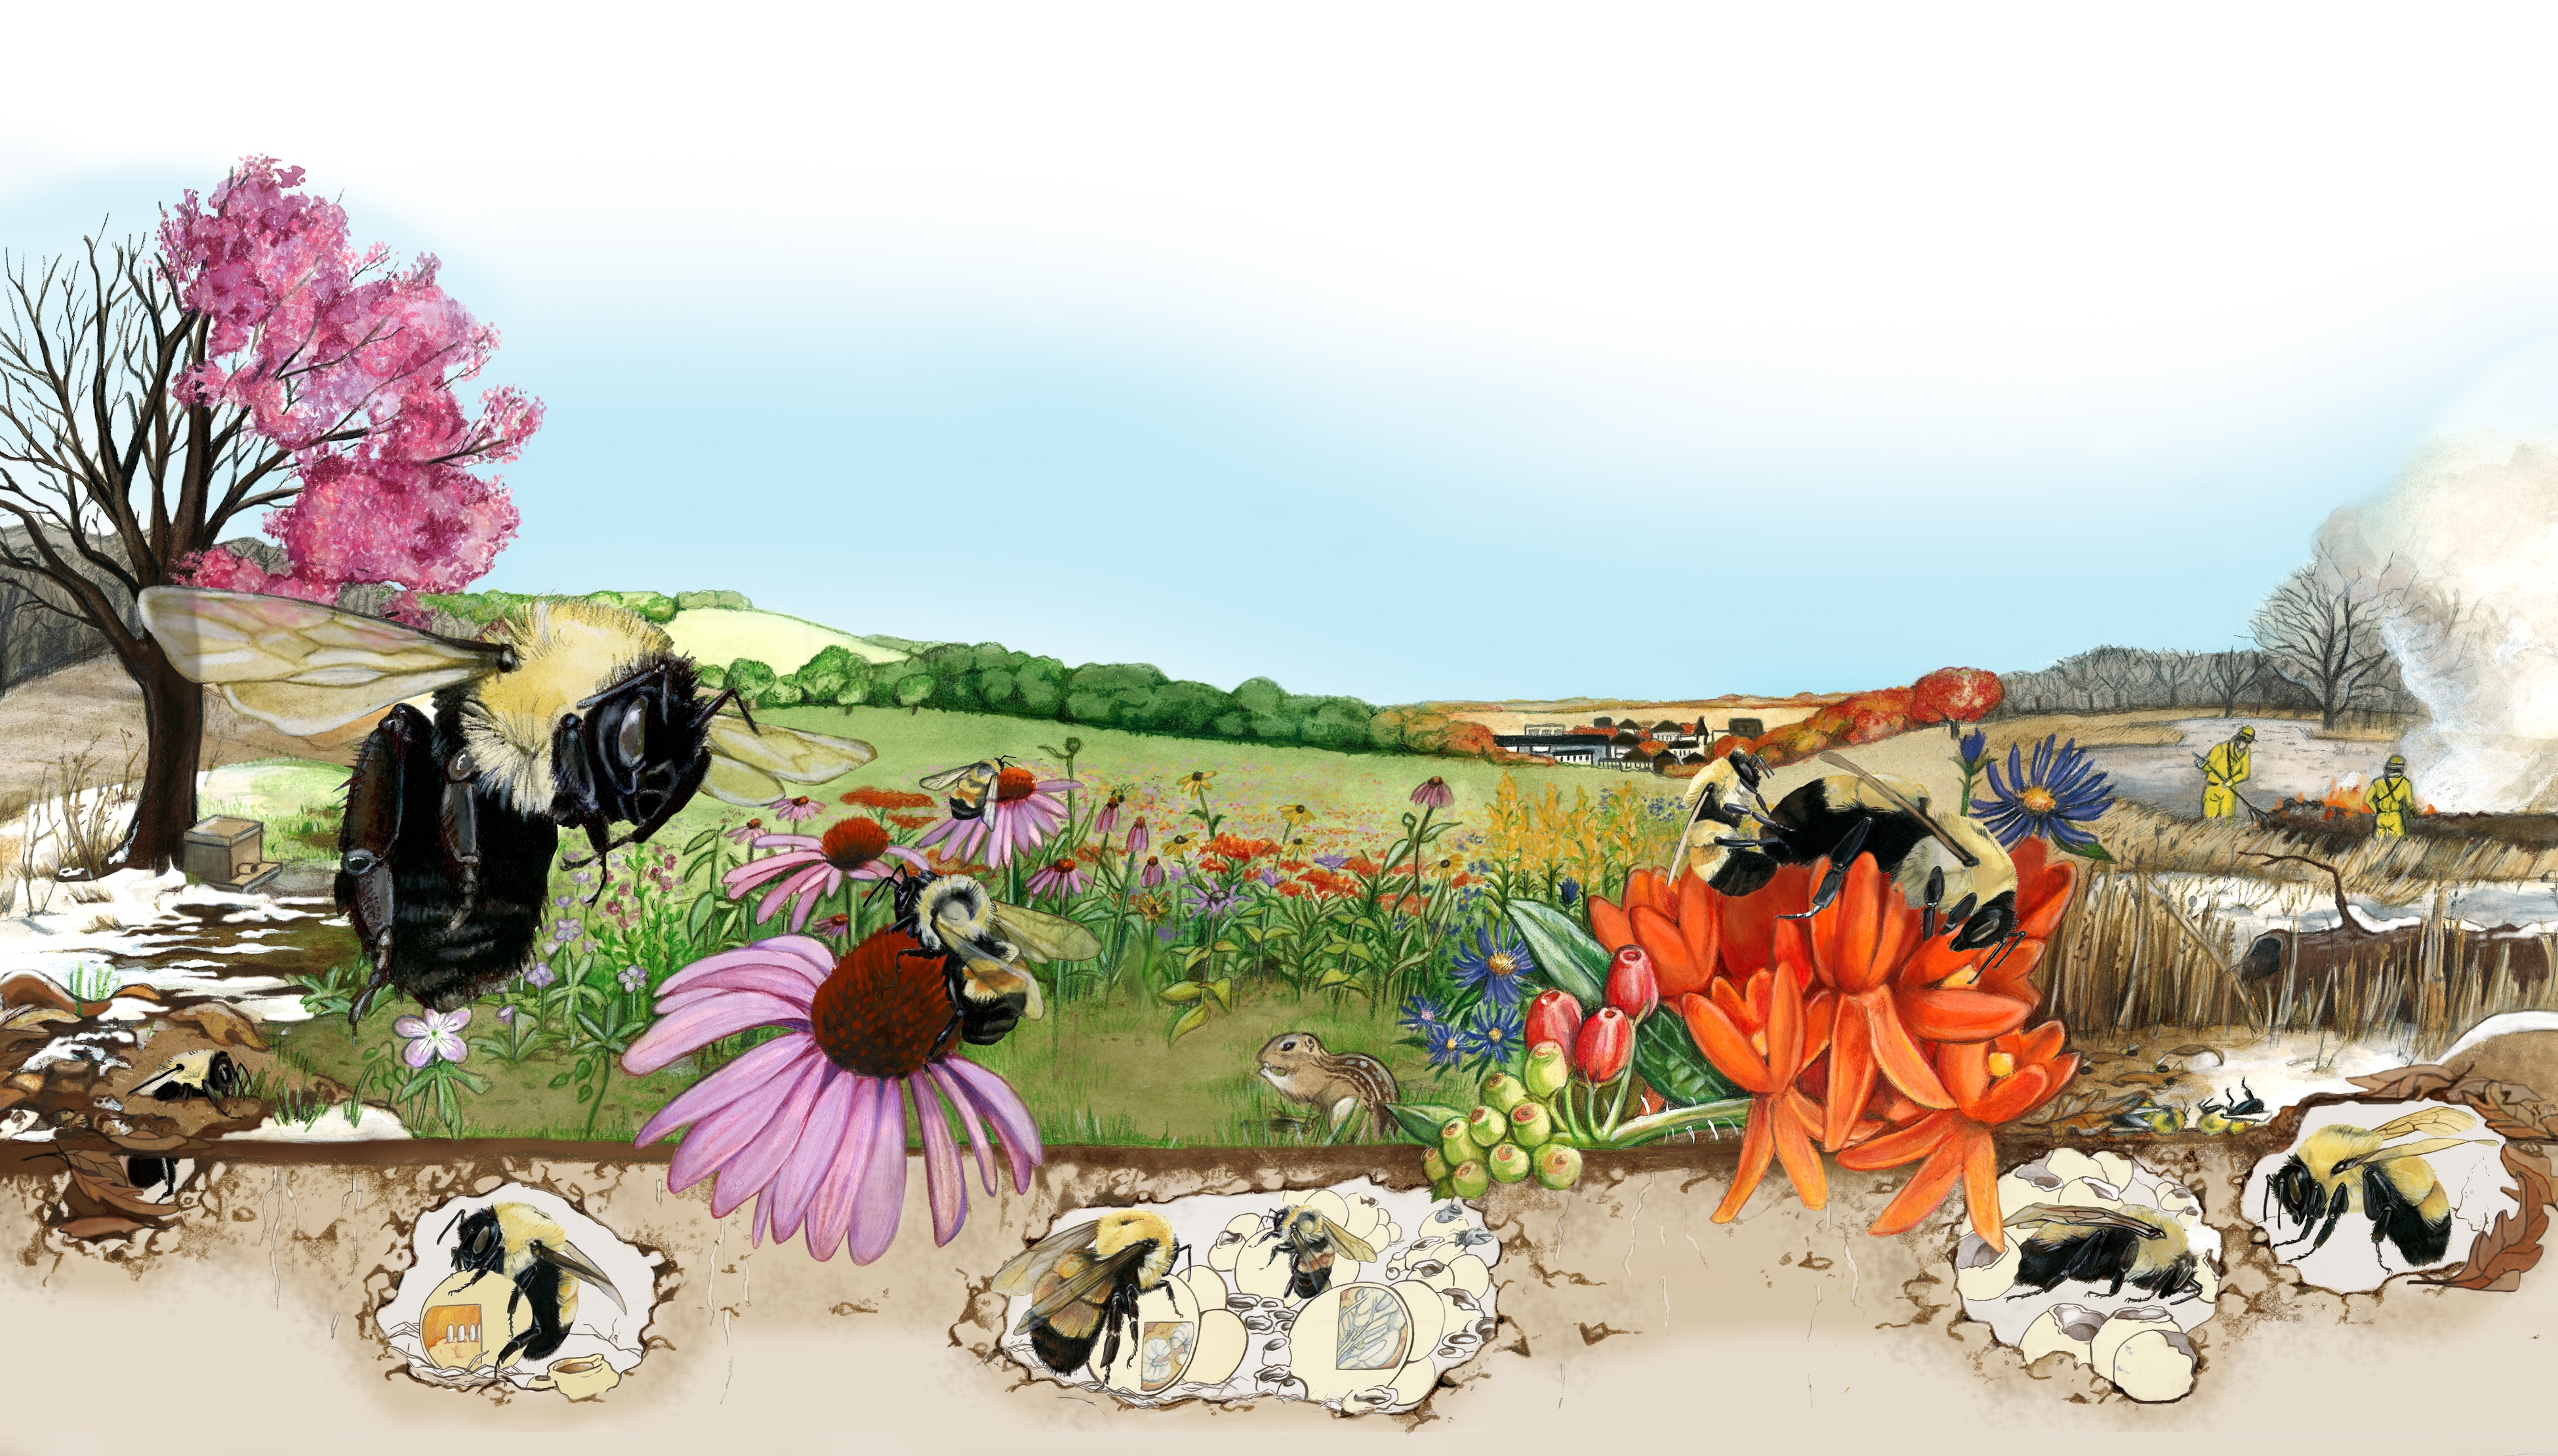 An illustrated landscape showing changing seasons (for instance, a tree that is half bare and half covered in bright pink blooms) shows bumble bees in various stages of their life cycle, including underground nests, foraging, and larvae.